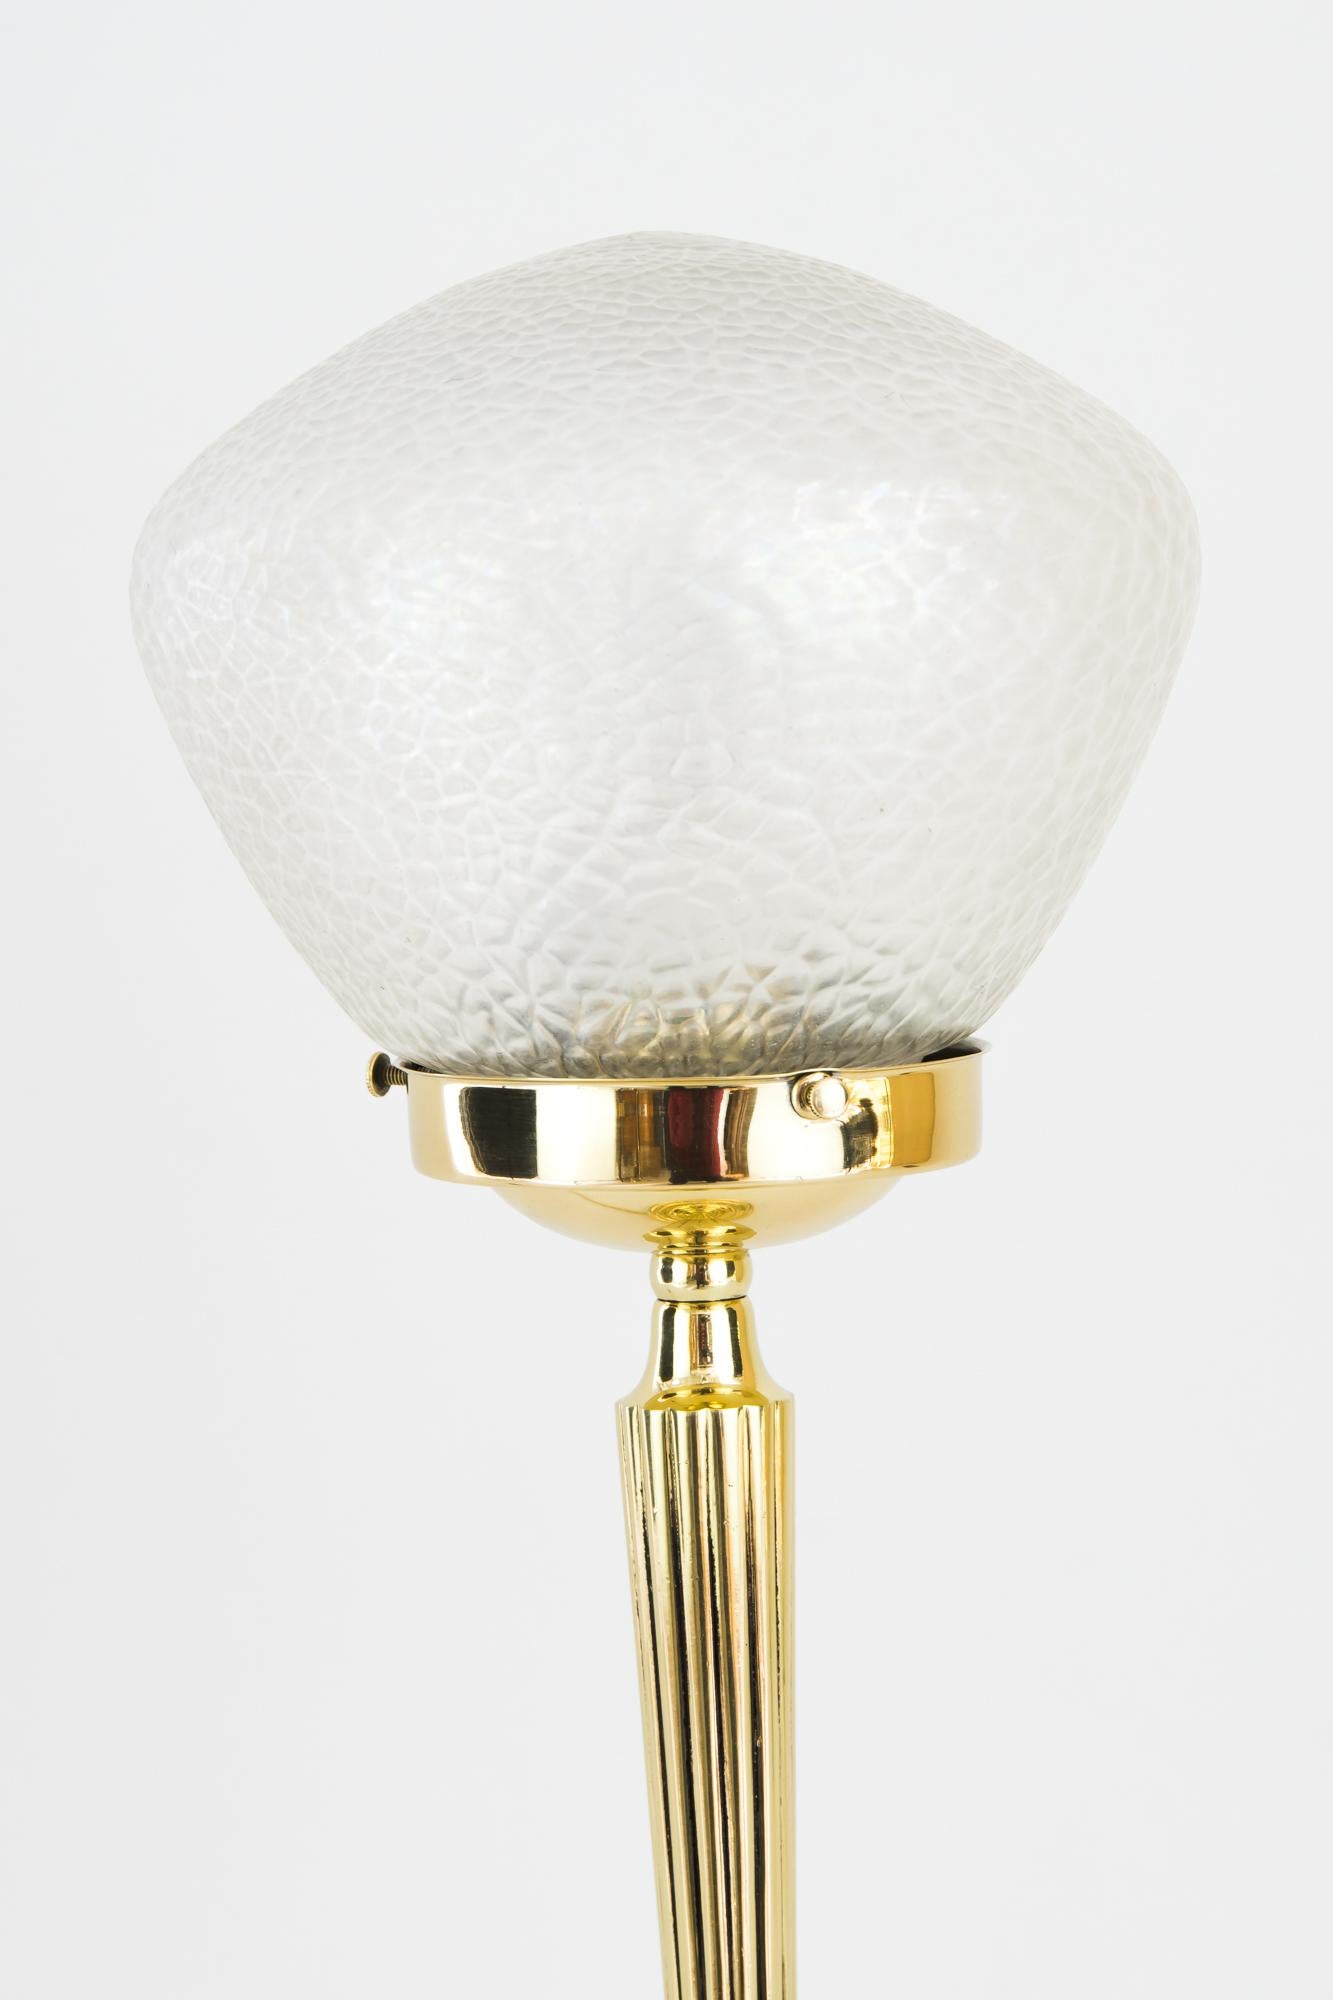 Lacquered Art Deco Table Lamp with Original Glass Shade, Vienna, circa 1920s